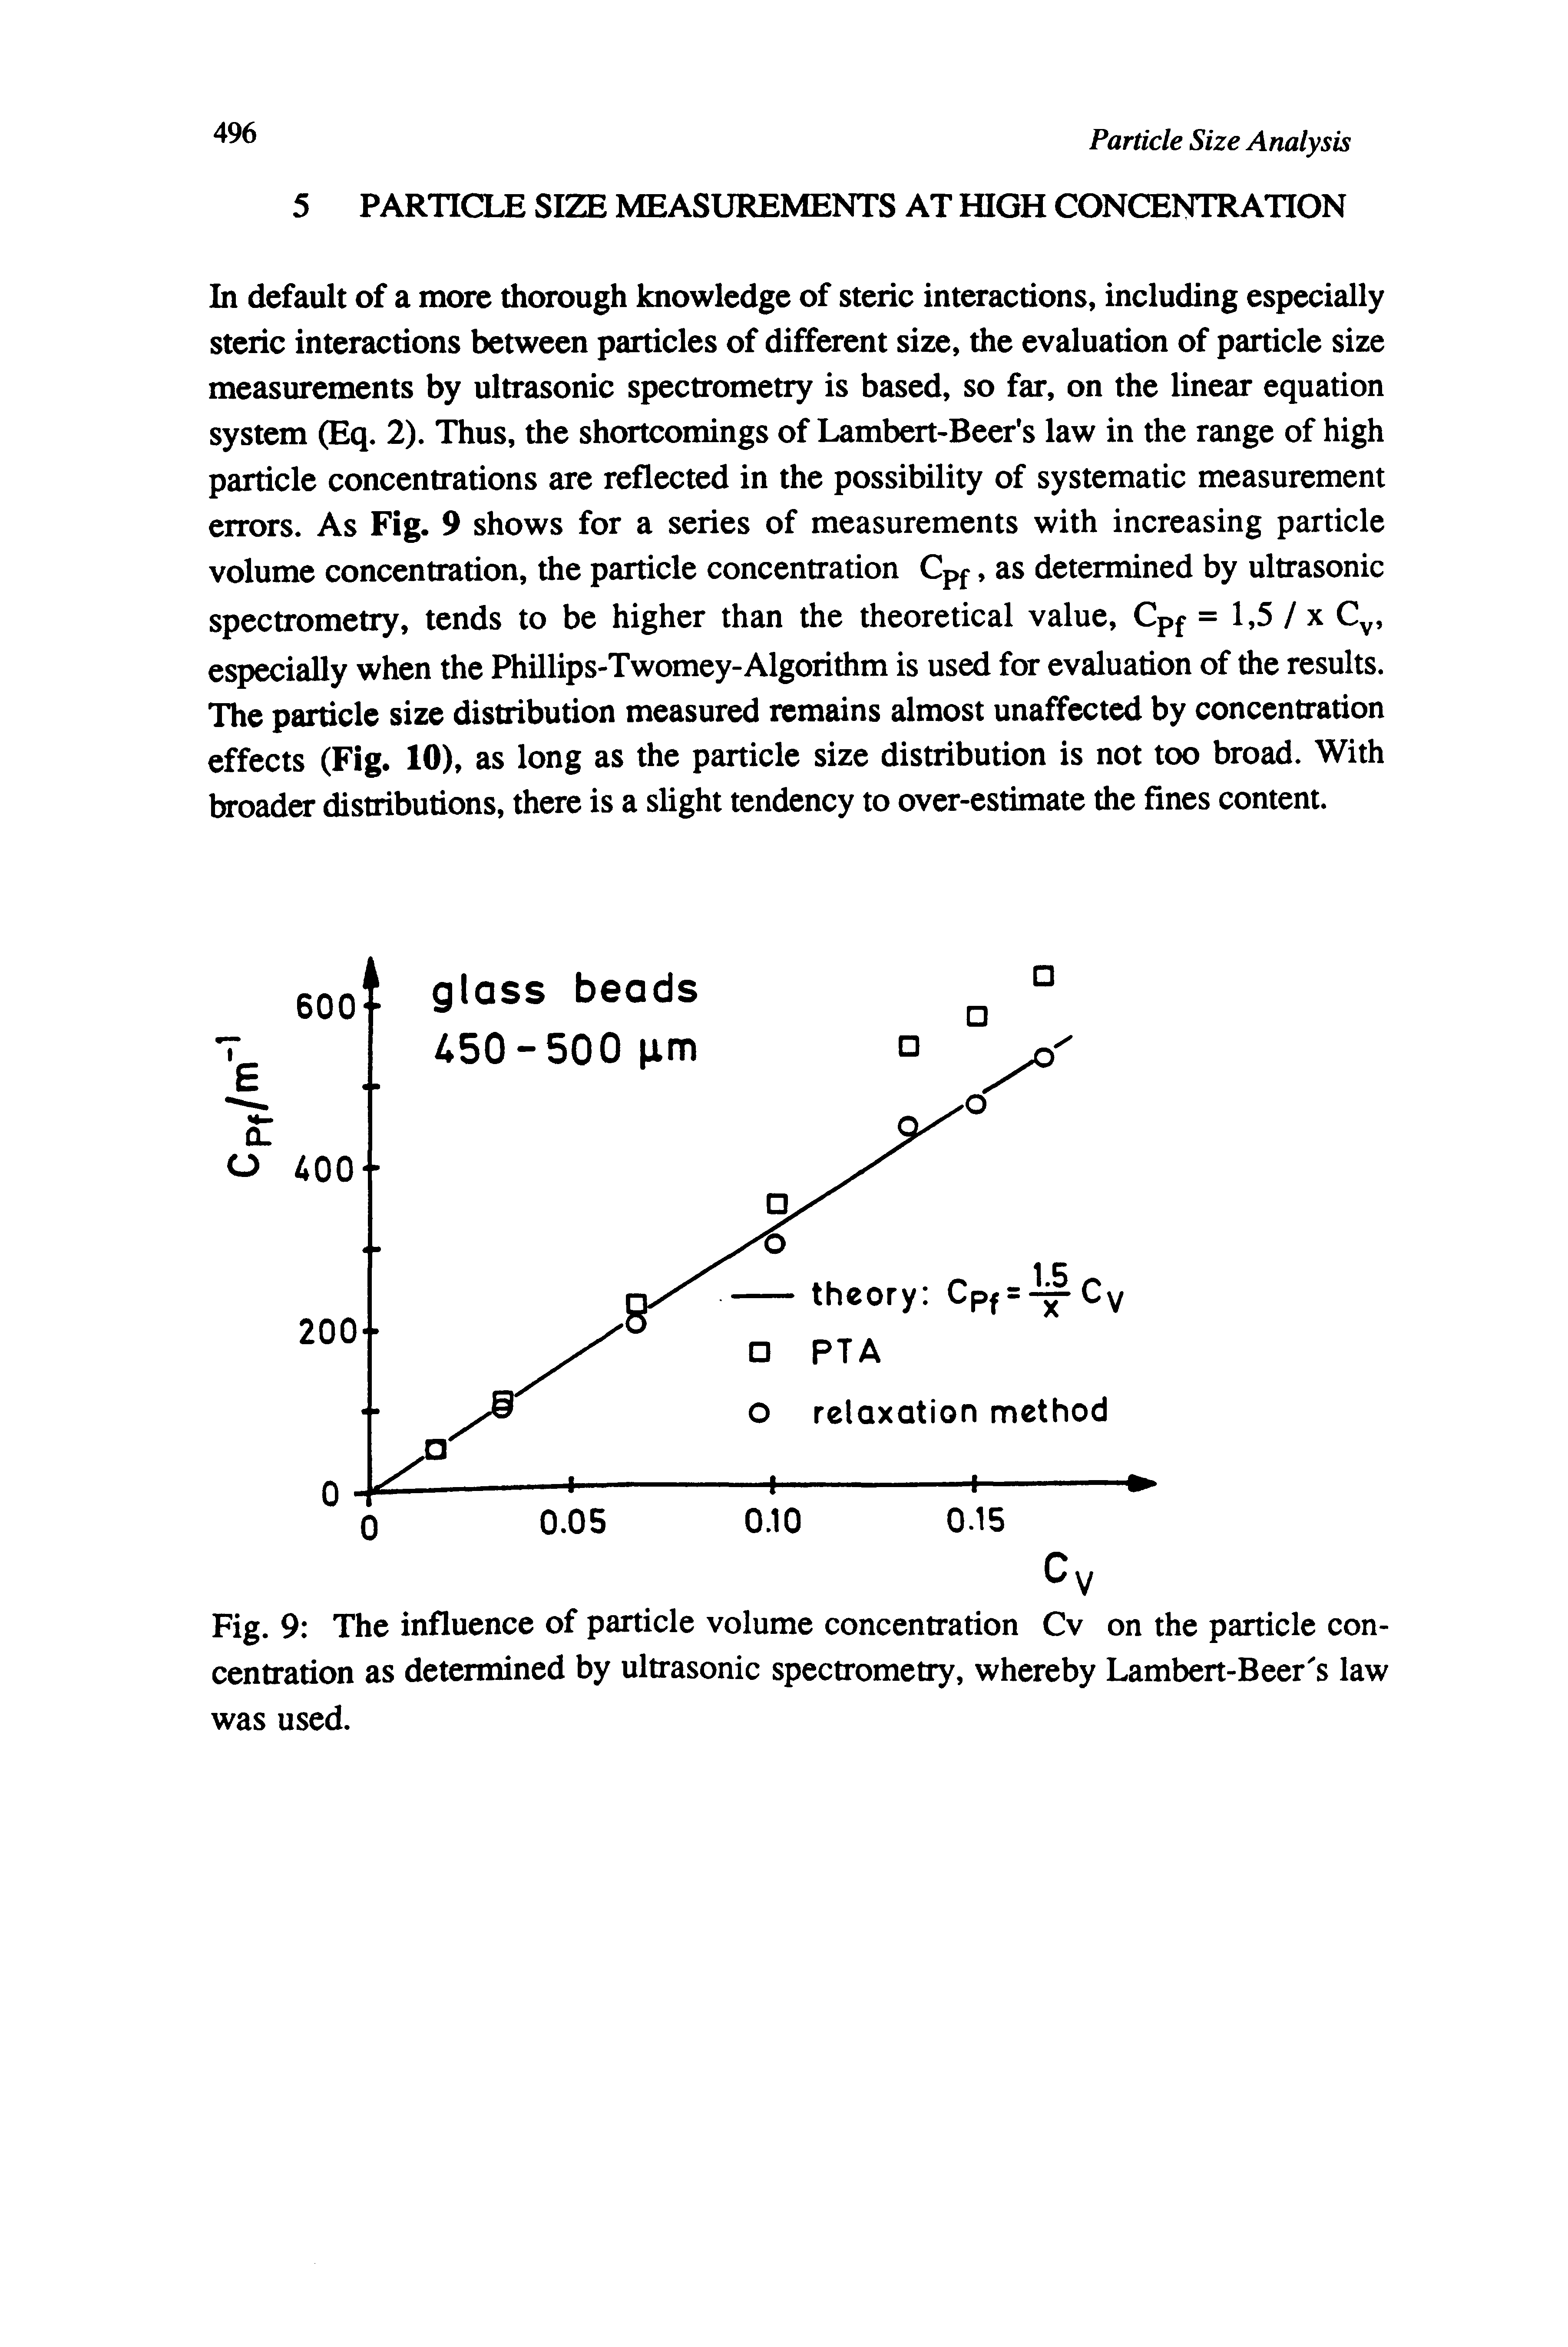 Fig. 9 The influence of particle volume concentration Cv on the particle concentration as determined by ultrasonic spectrometry, whereby Lambert-Beer s law was used.